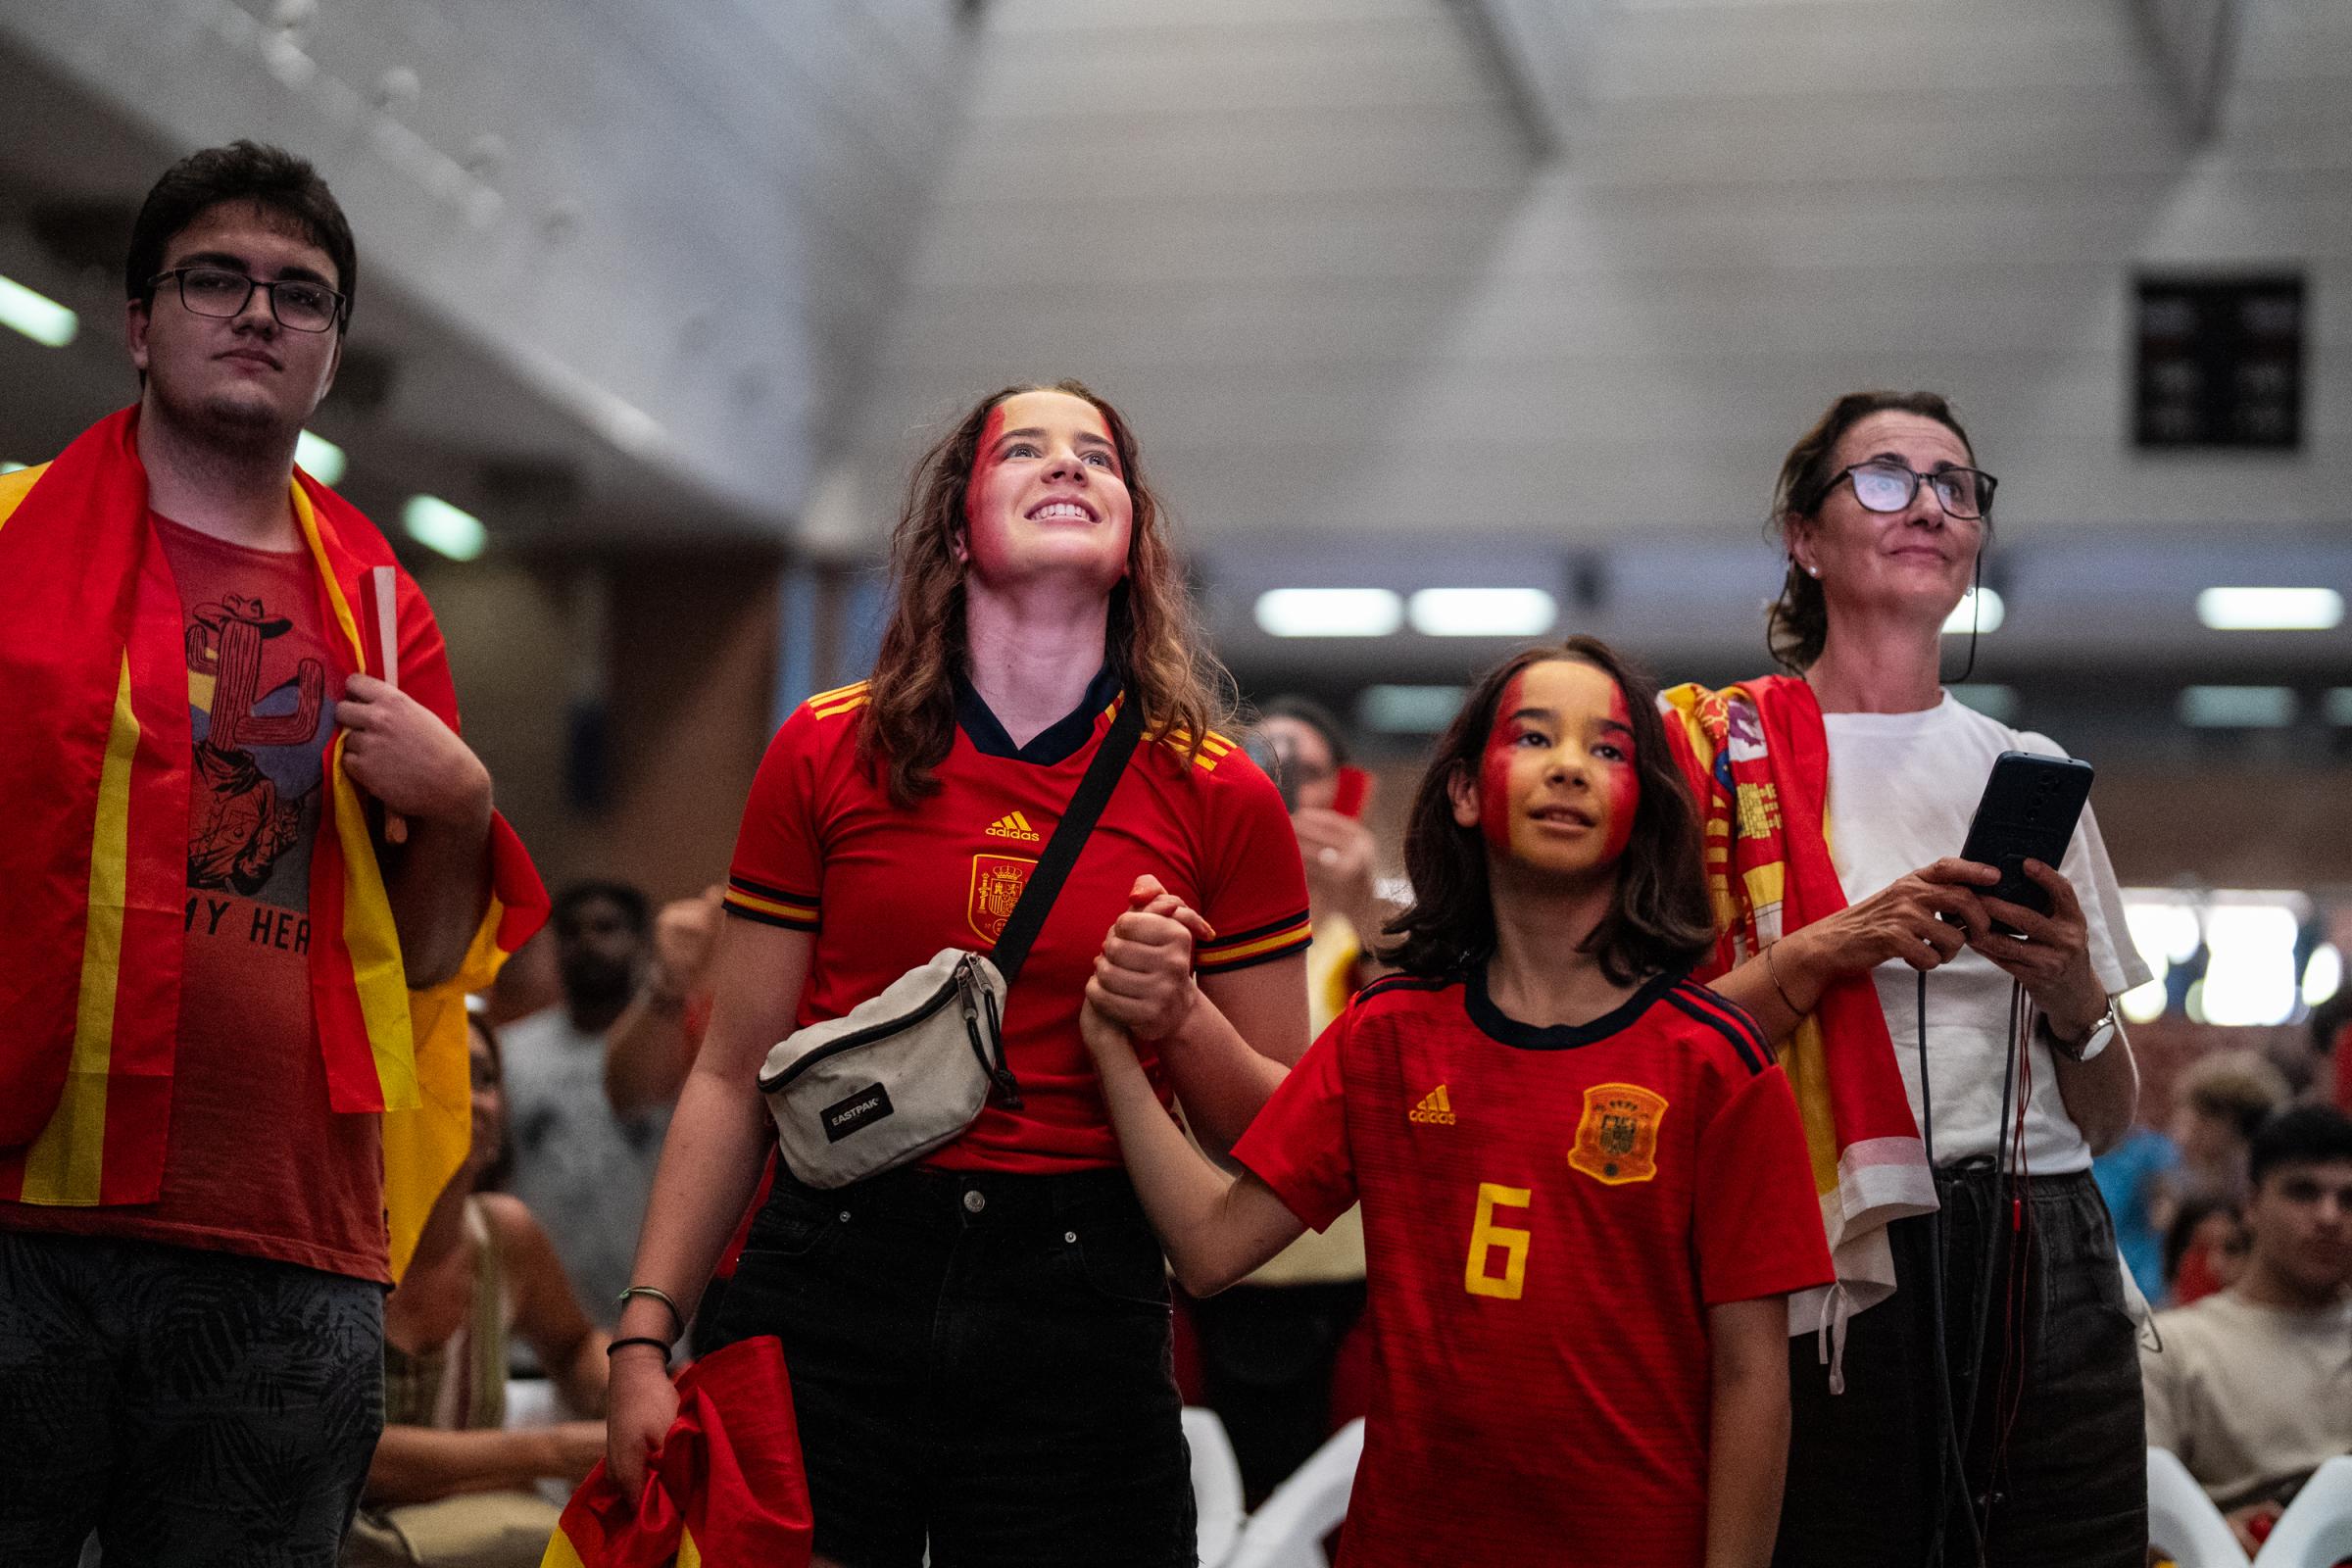 Fans Cheer For Spain As They Take On England In The Women's World Cup Final - BARCELONA, SPAIN - AUGUST 20: Fans of the Spanish women's...